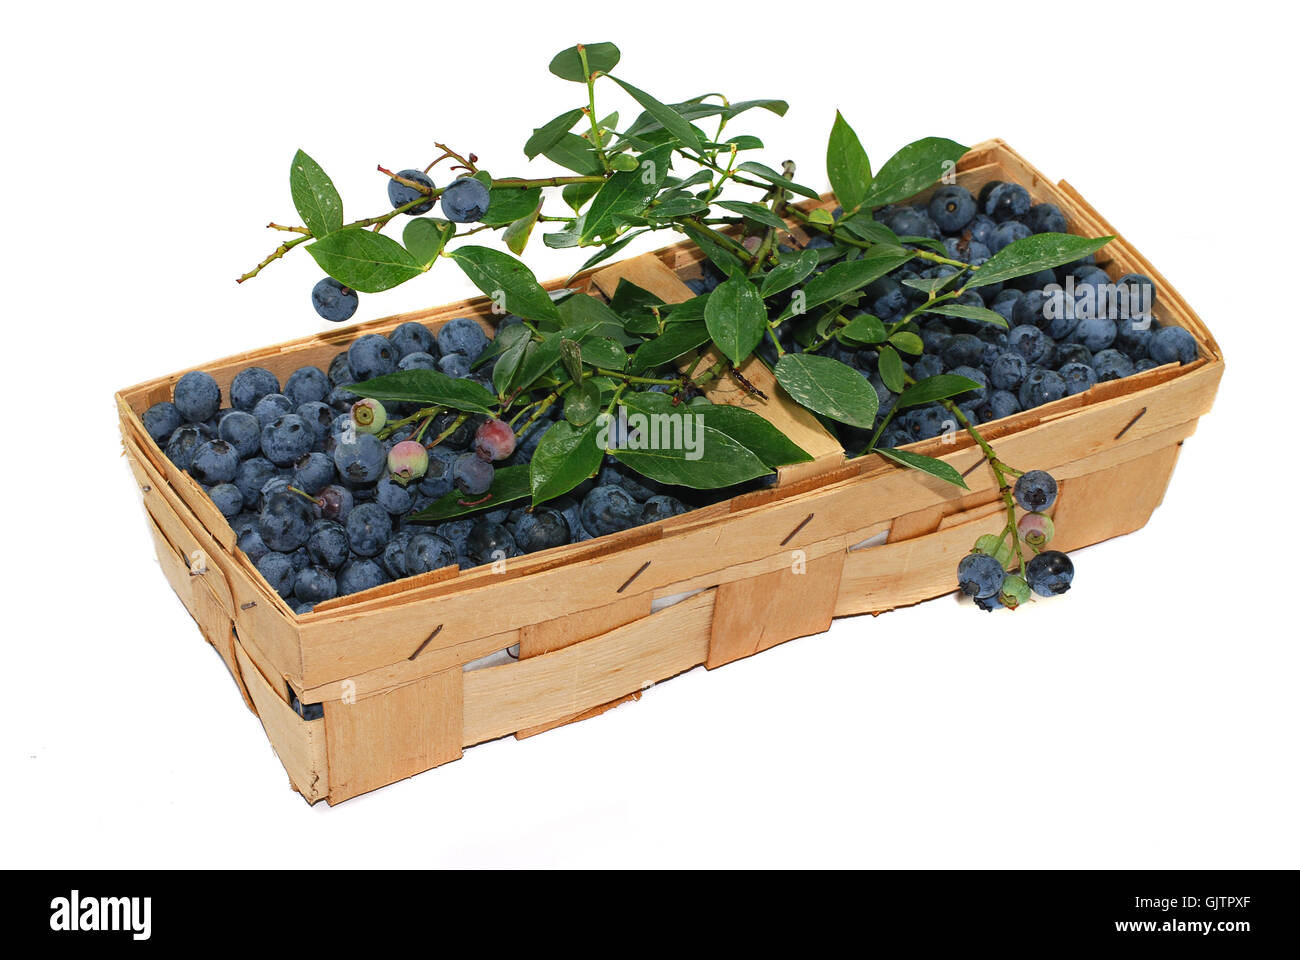 blueberries in a wooden basket Stock Photo